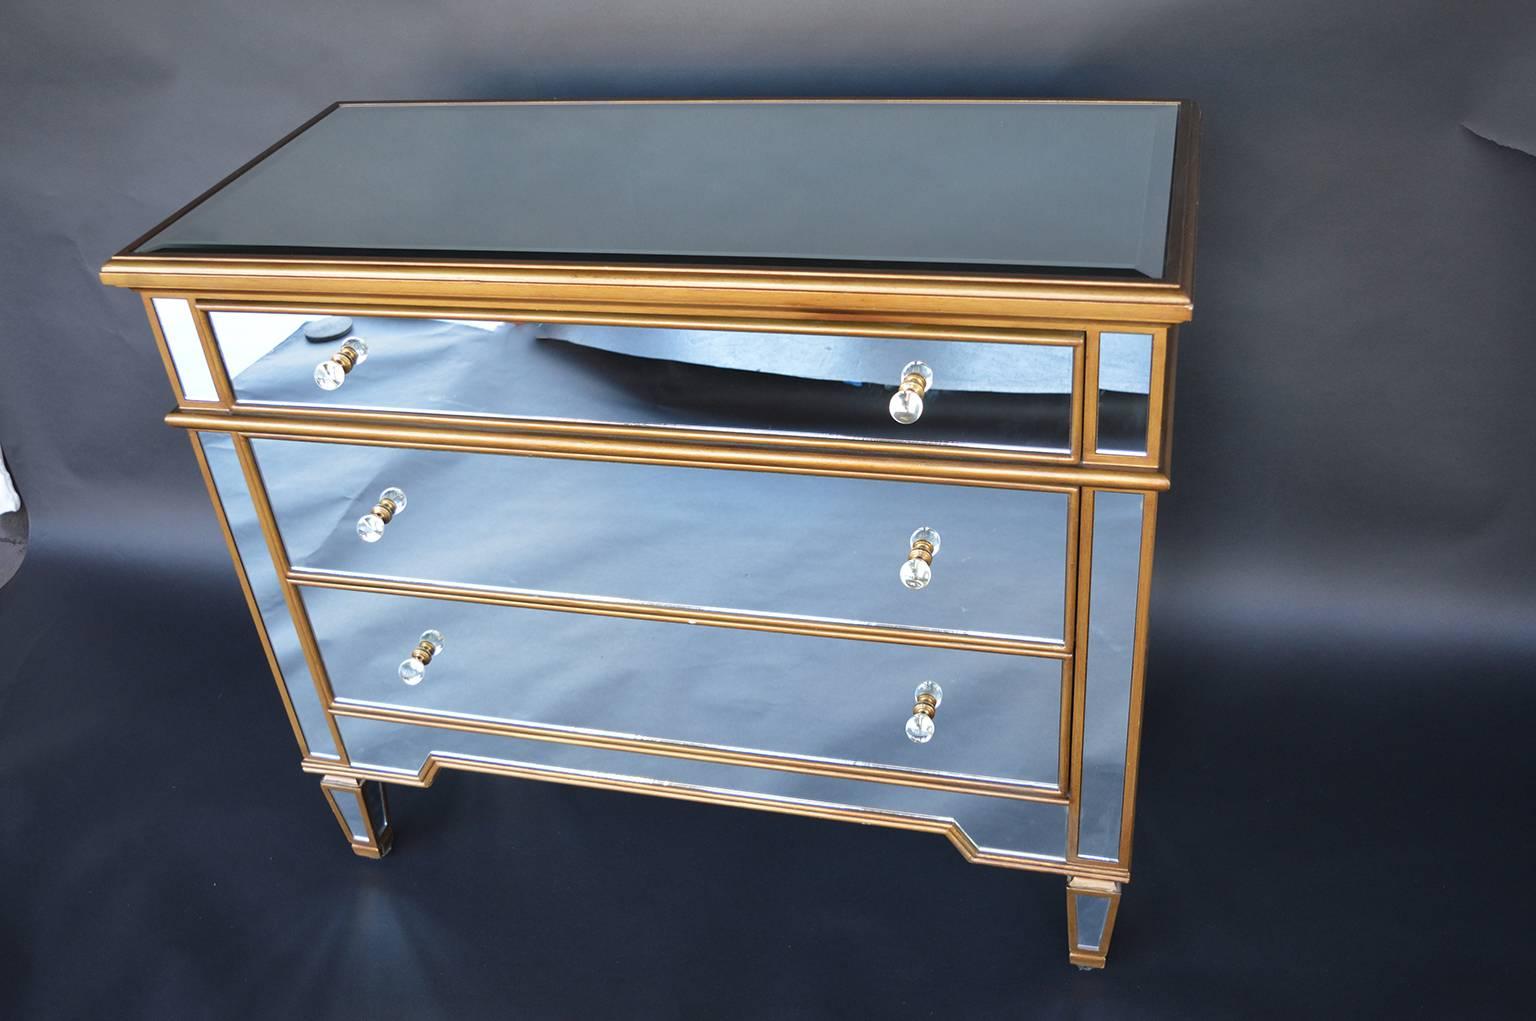 Pair of mirrored drawers with gold accents.